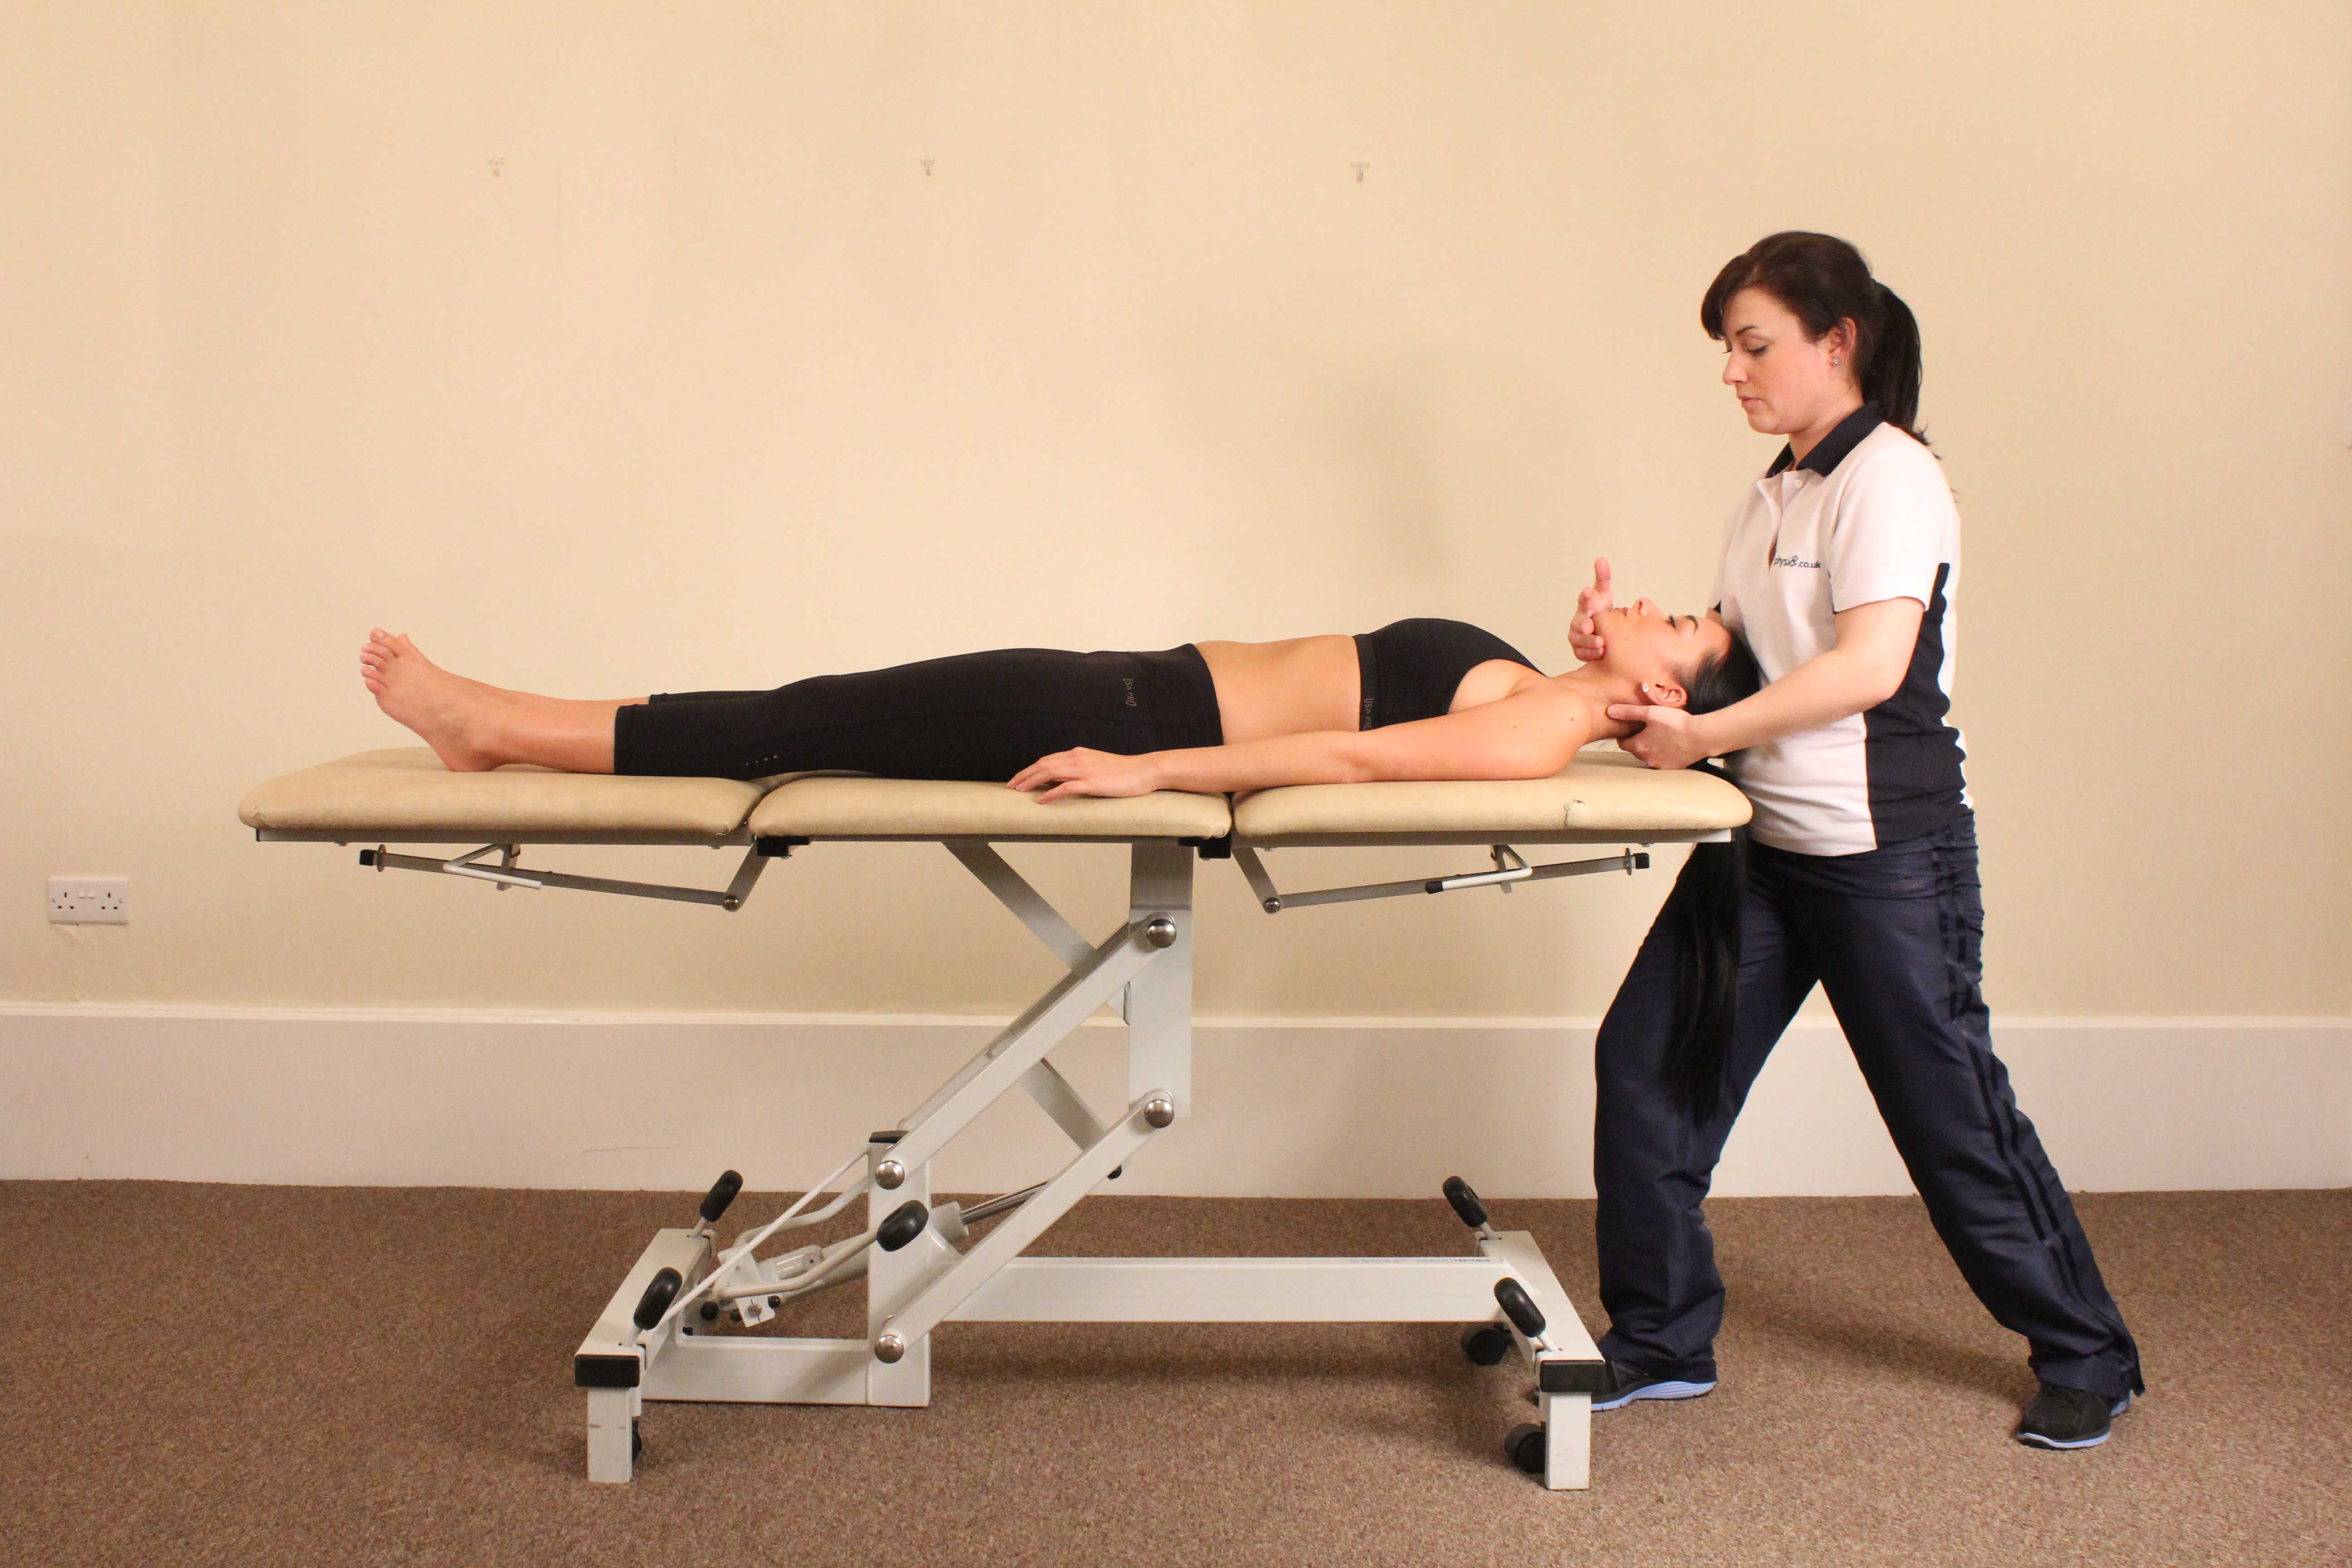 Passive stretches and mobilisations of the cervical spine and muscles of the neck to relieve pain and stiffness